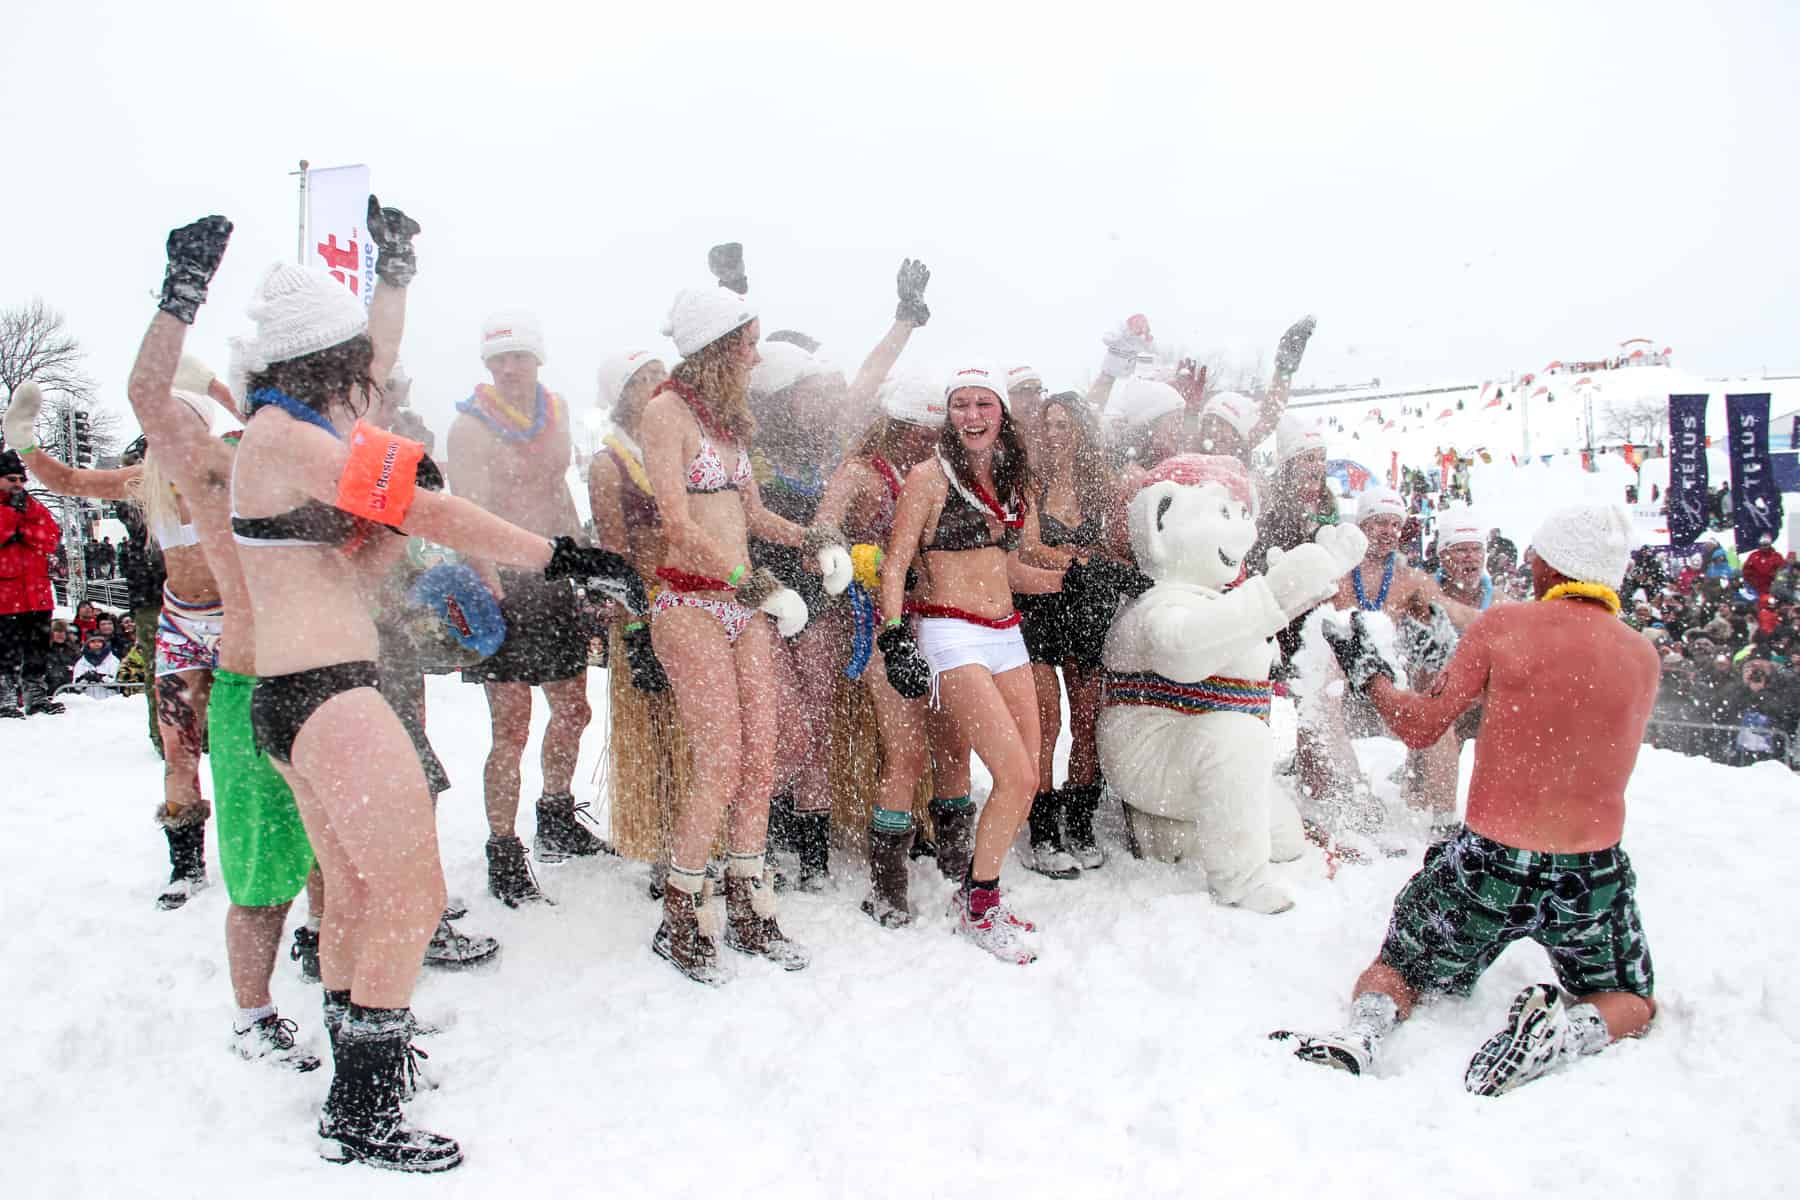 A group of people in swimwear and white hats have a snowfight with the snowman figure, Bonhomme, during the Snow Bath at the The Carnival de Quebec.